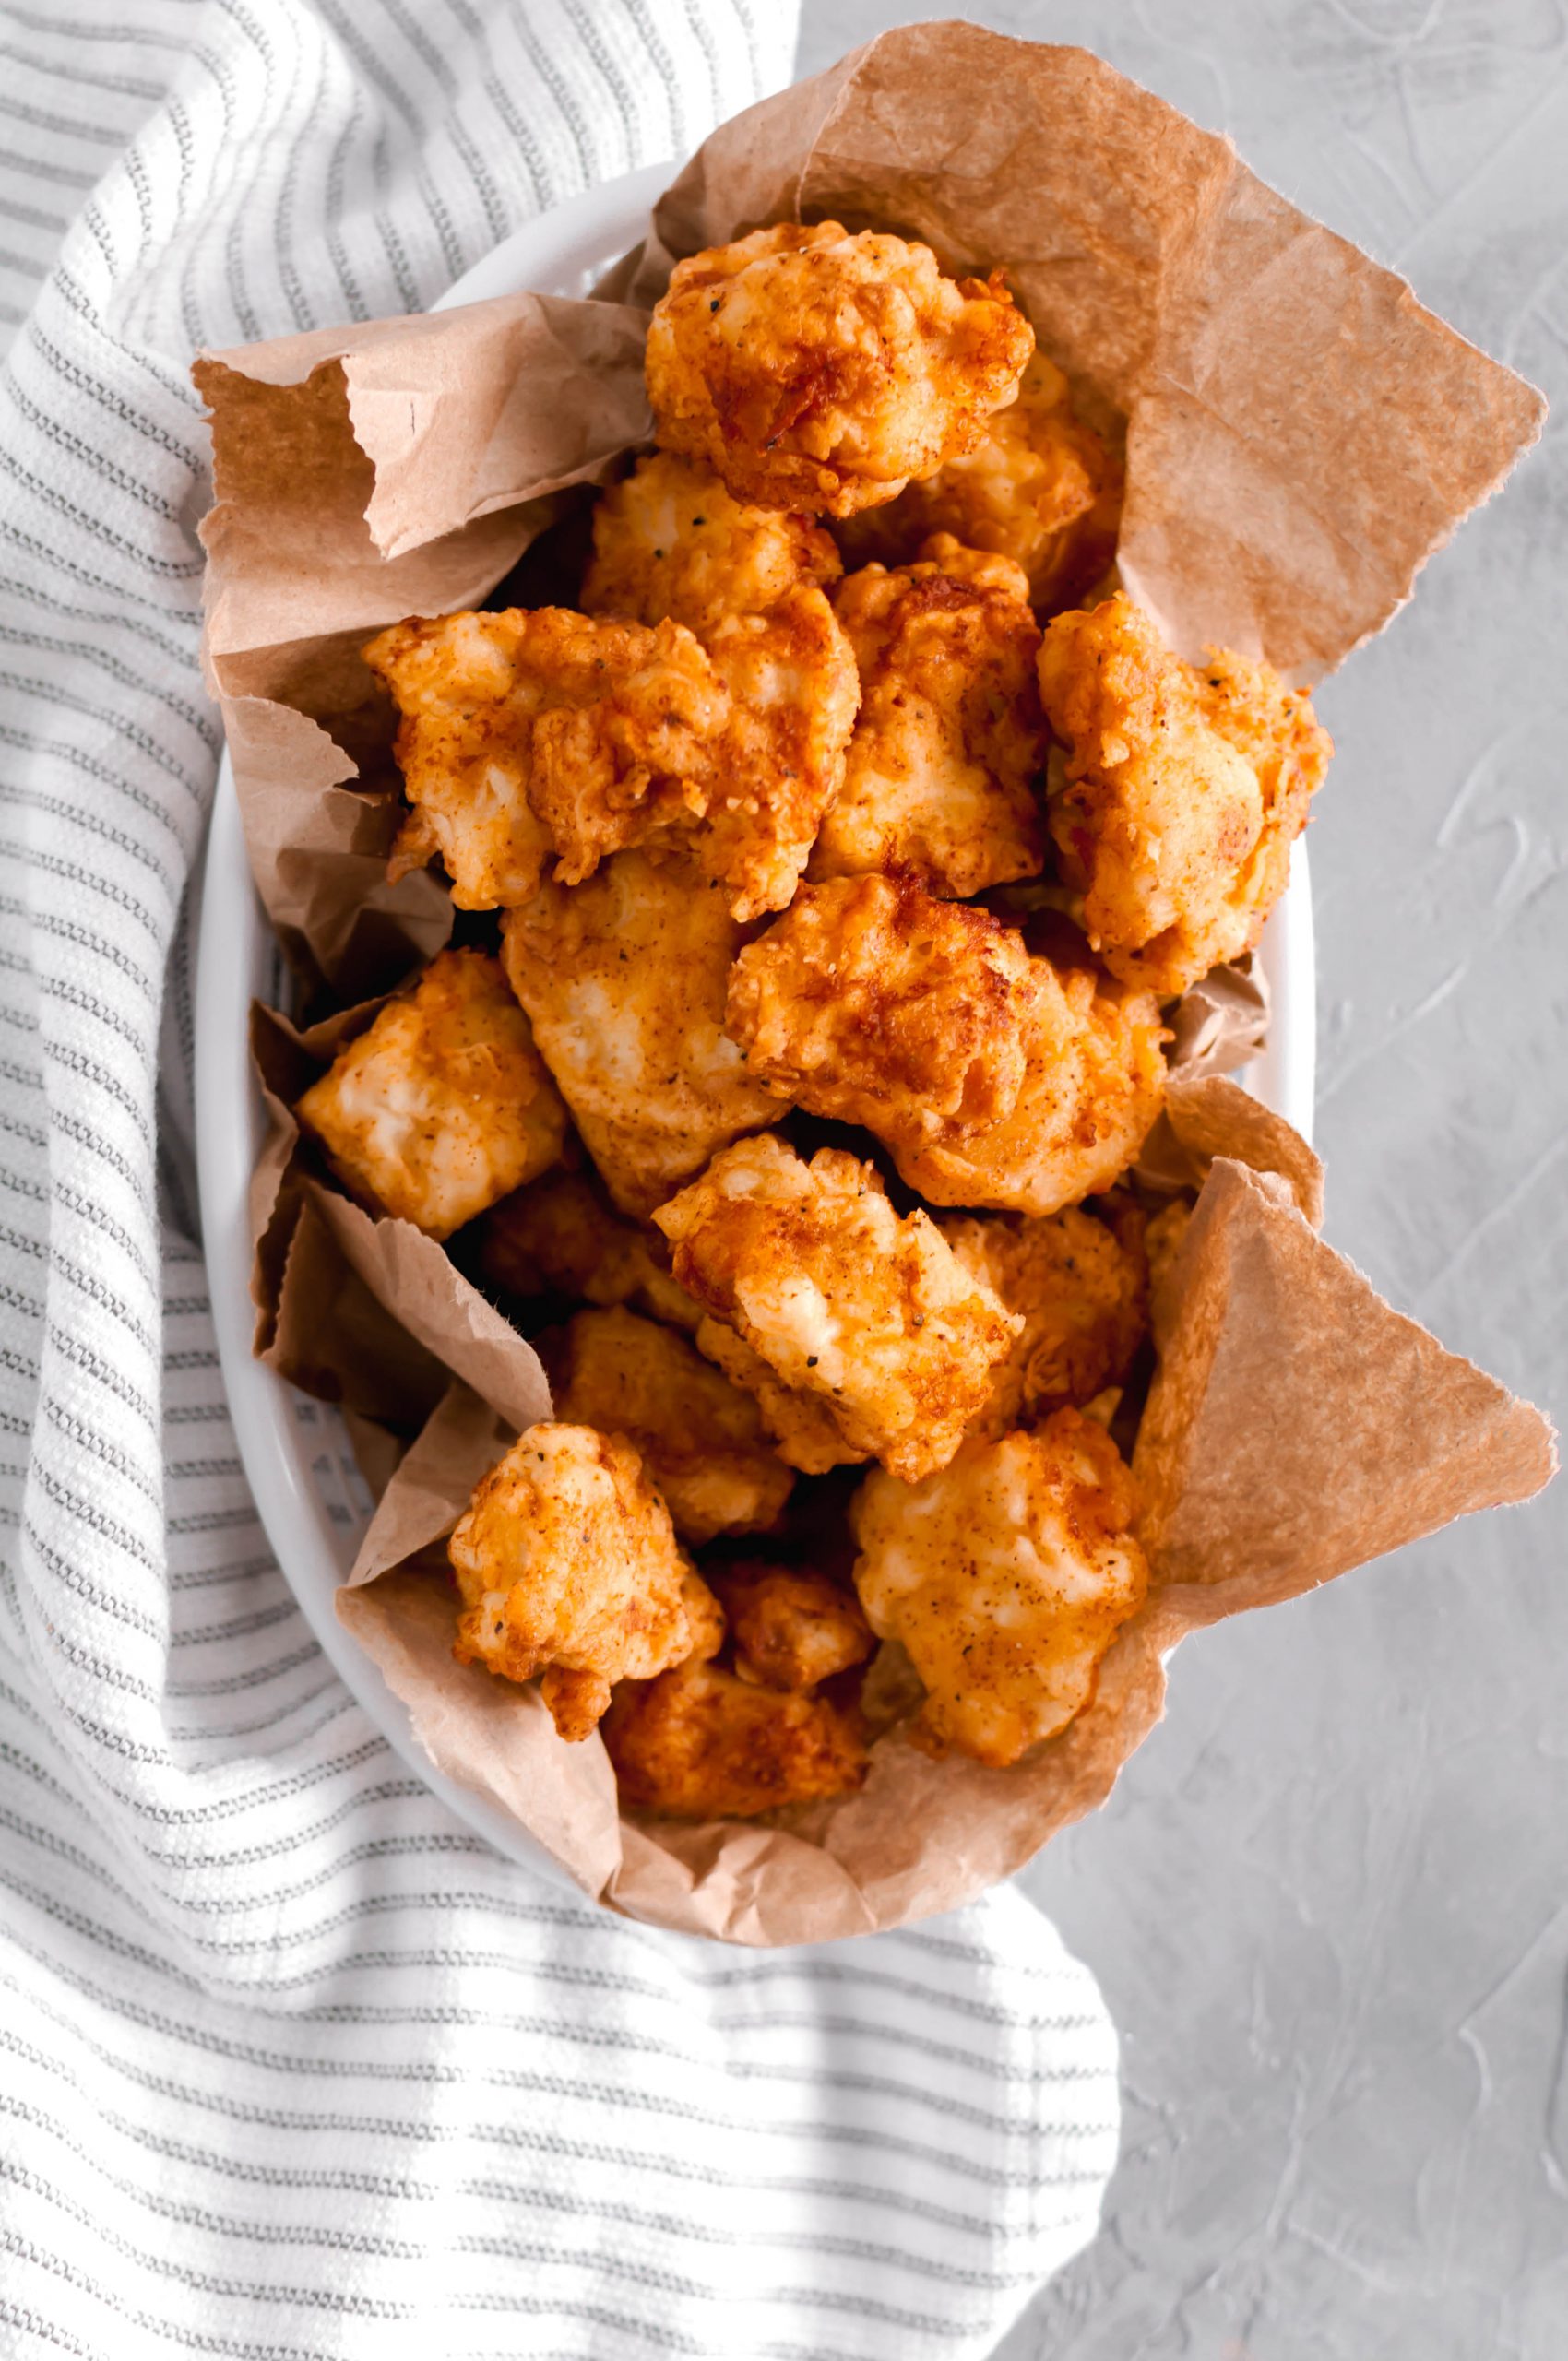 Skip the store-bought and make you homemade chicken nuggets instead. They are easier than you might think and way more delicious. The perfect family friendly dinner.